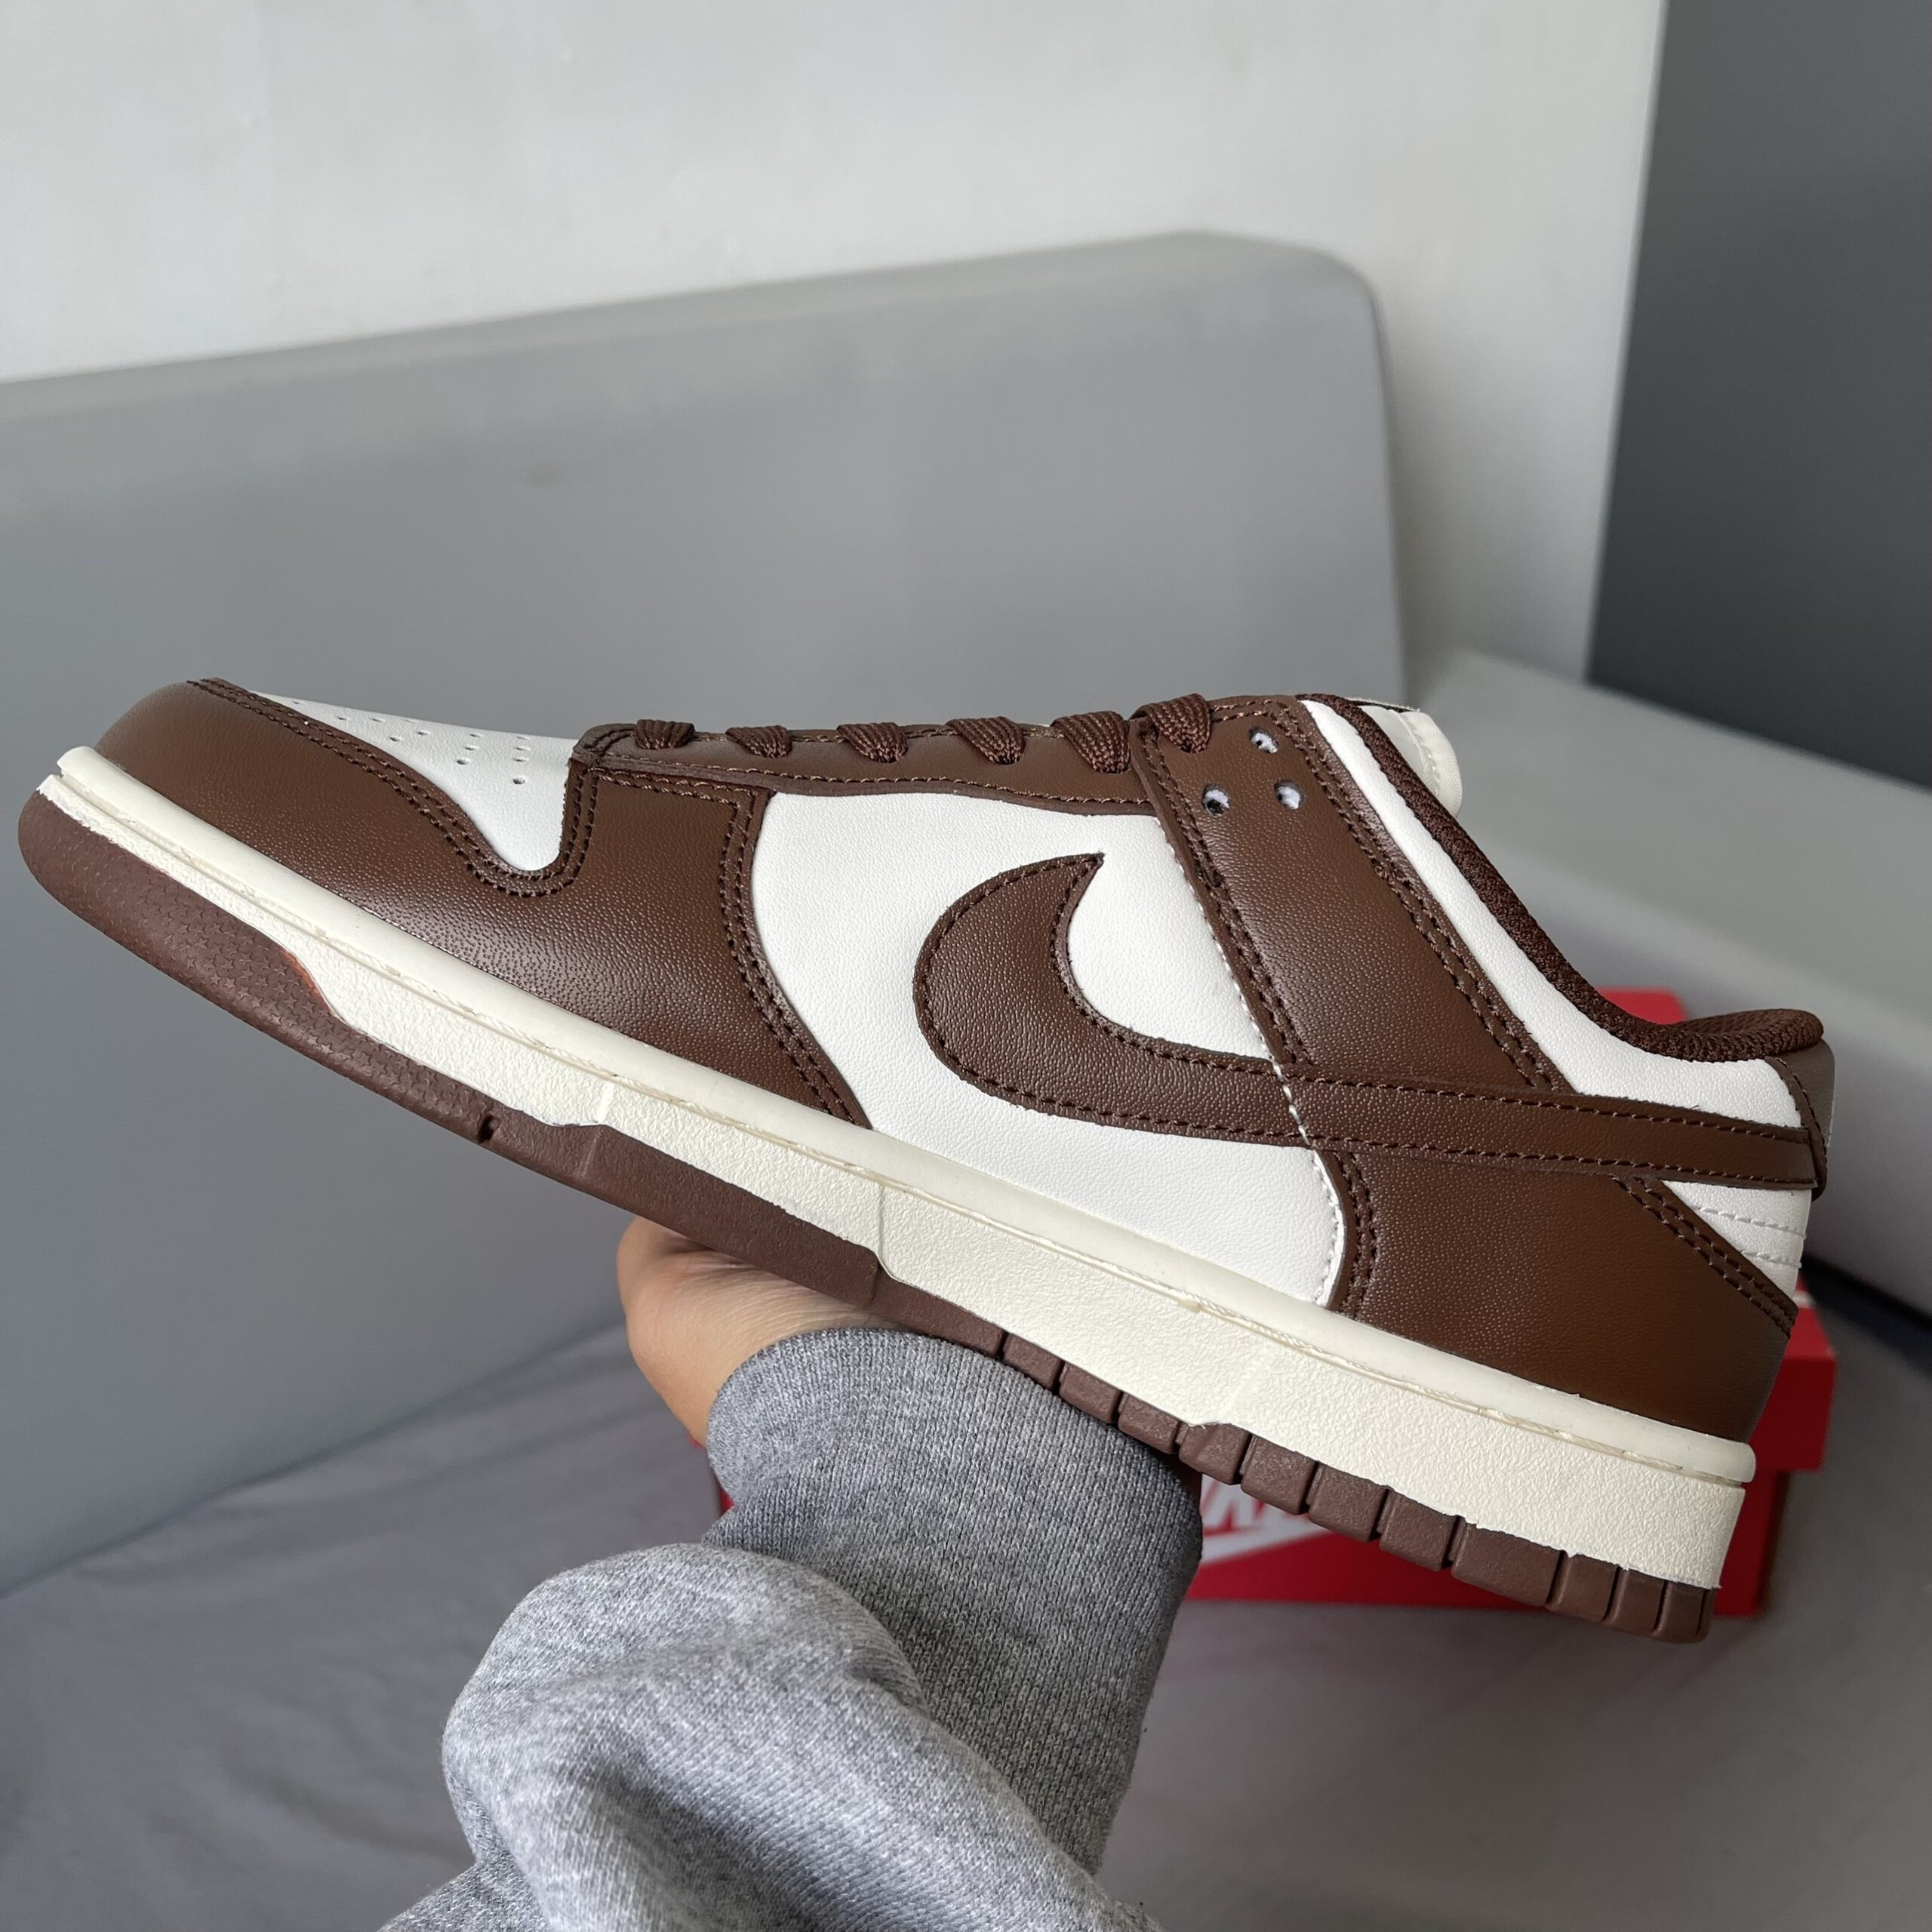 Giày Nike SB Dunk Low Cacao Wow Like Auth